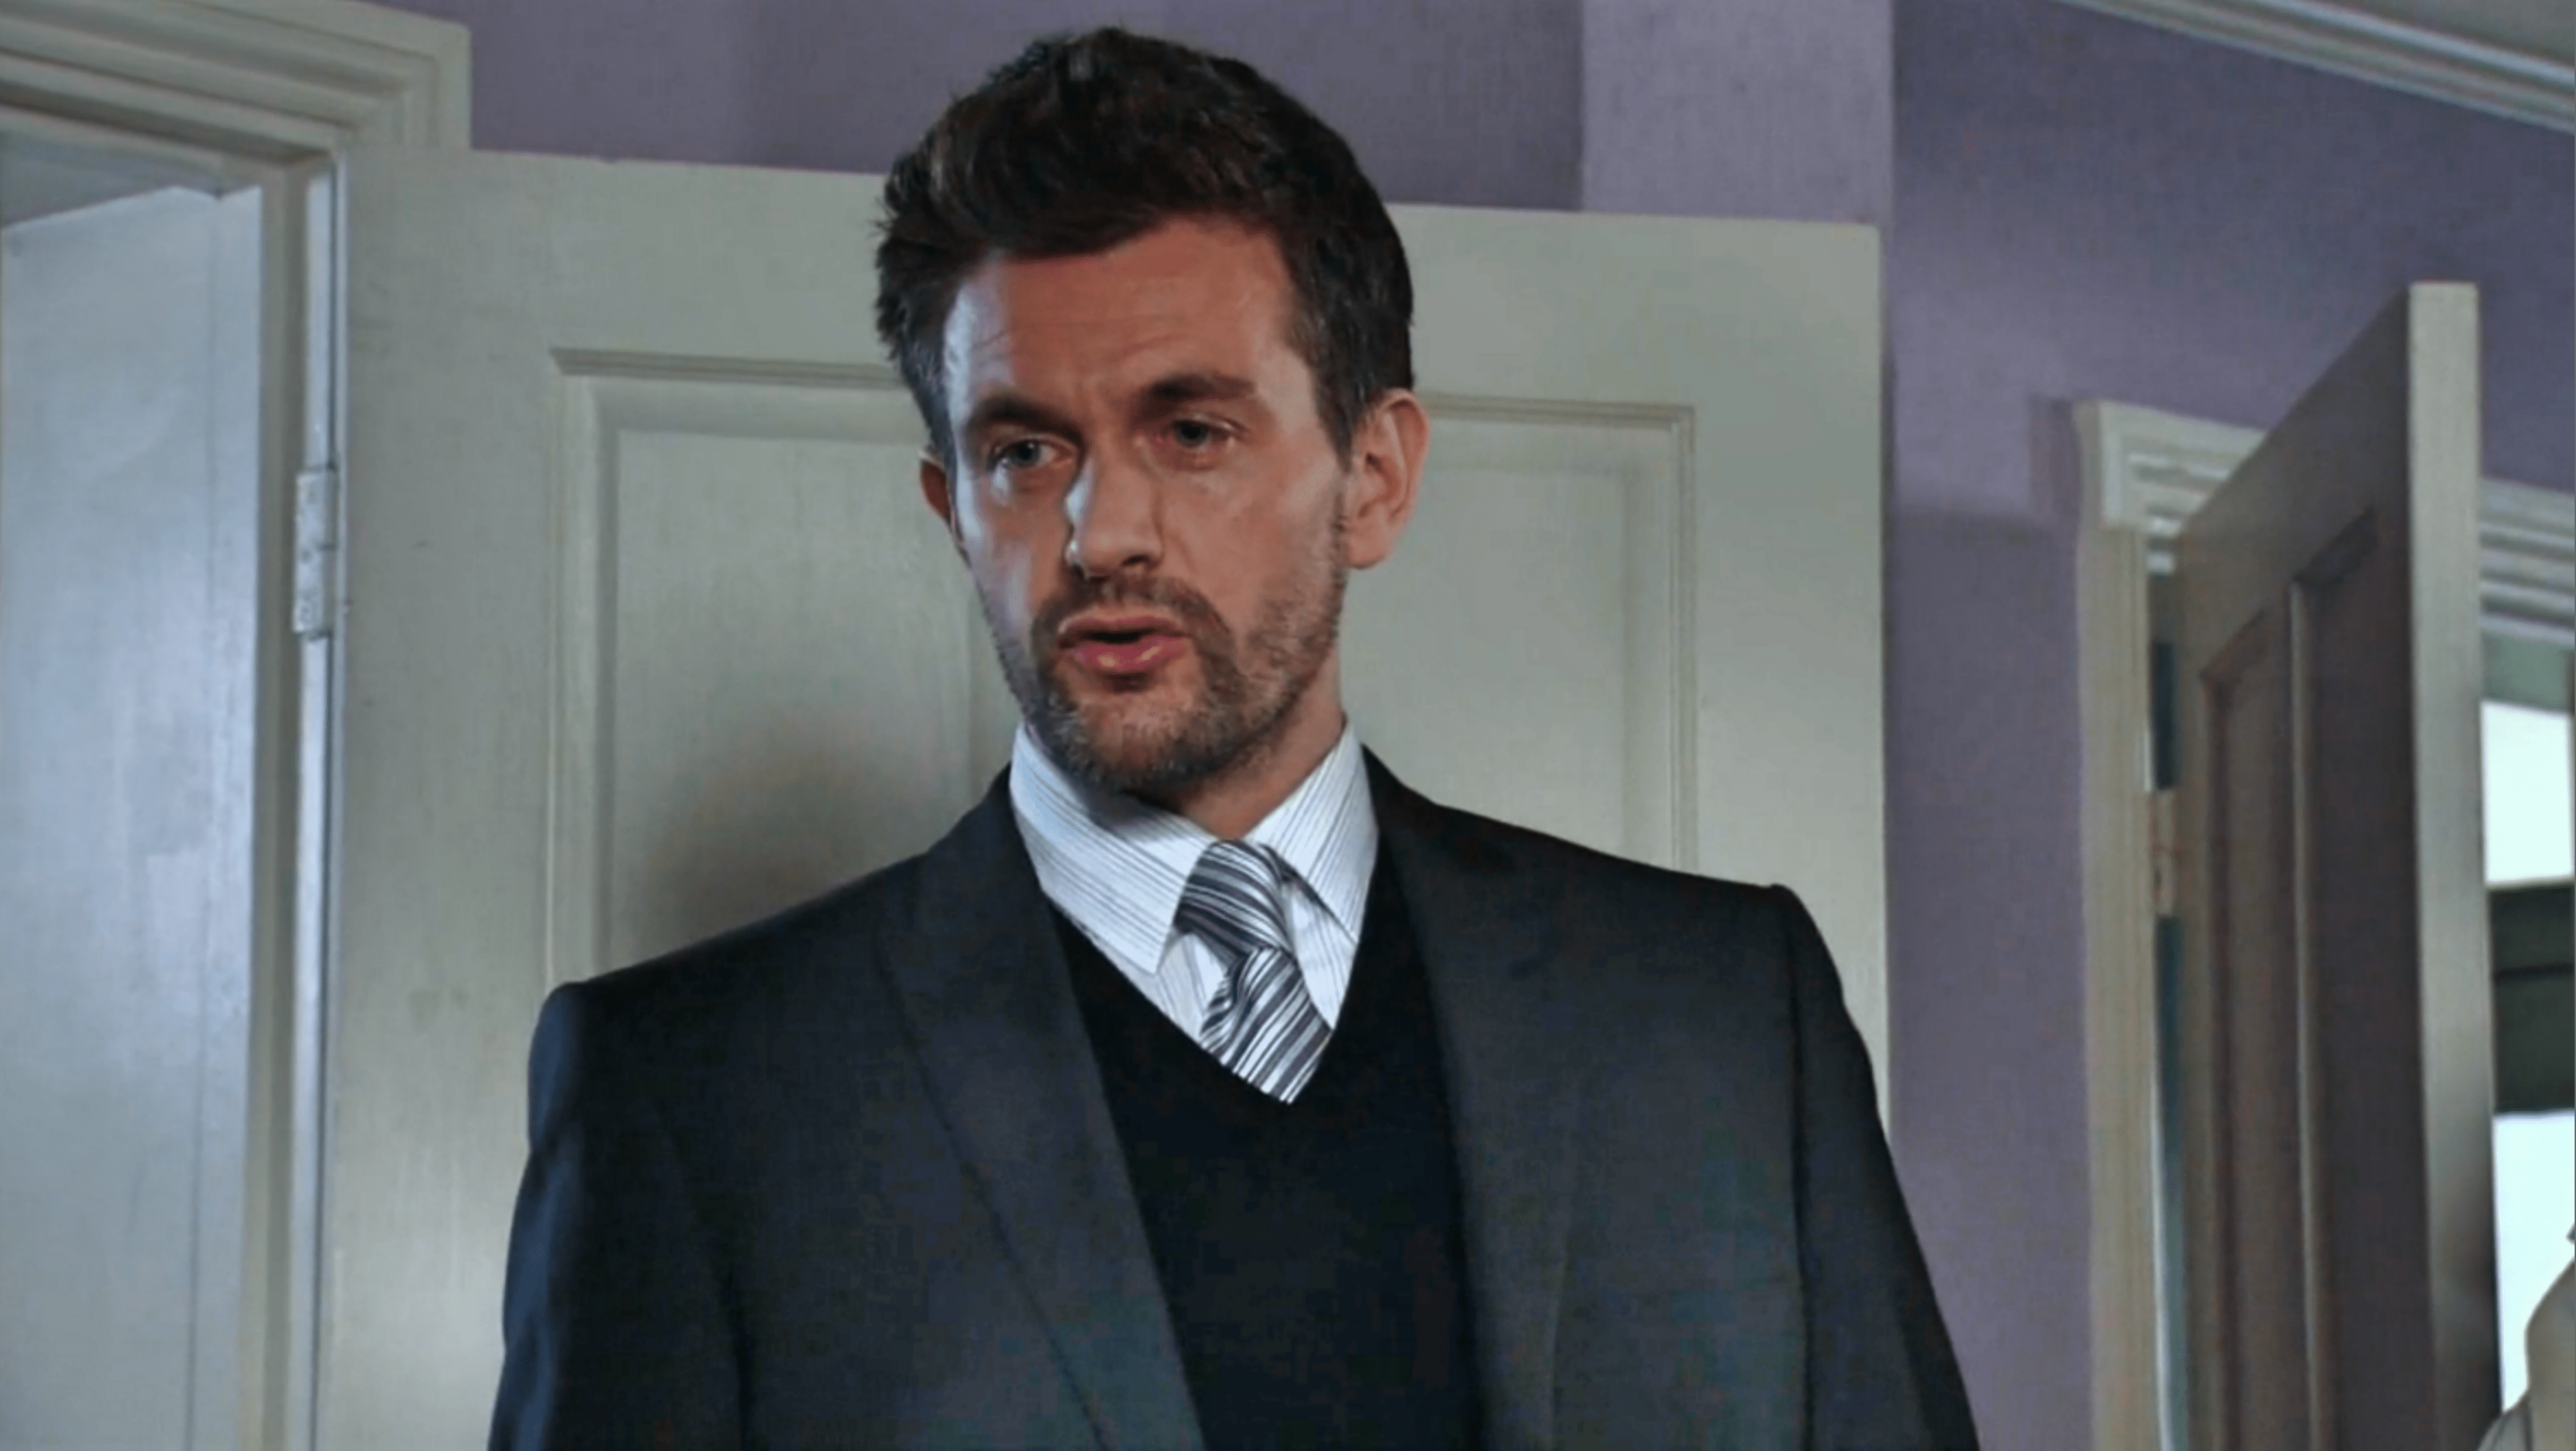 EastEnders and Marcella star Glen Wallace cast in Coronation Street for big Carla story